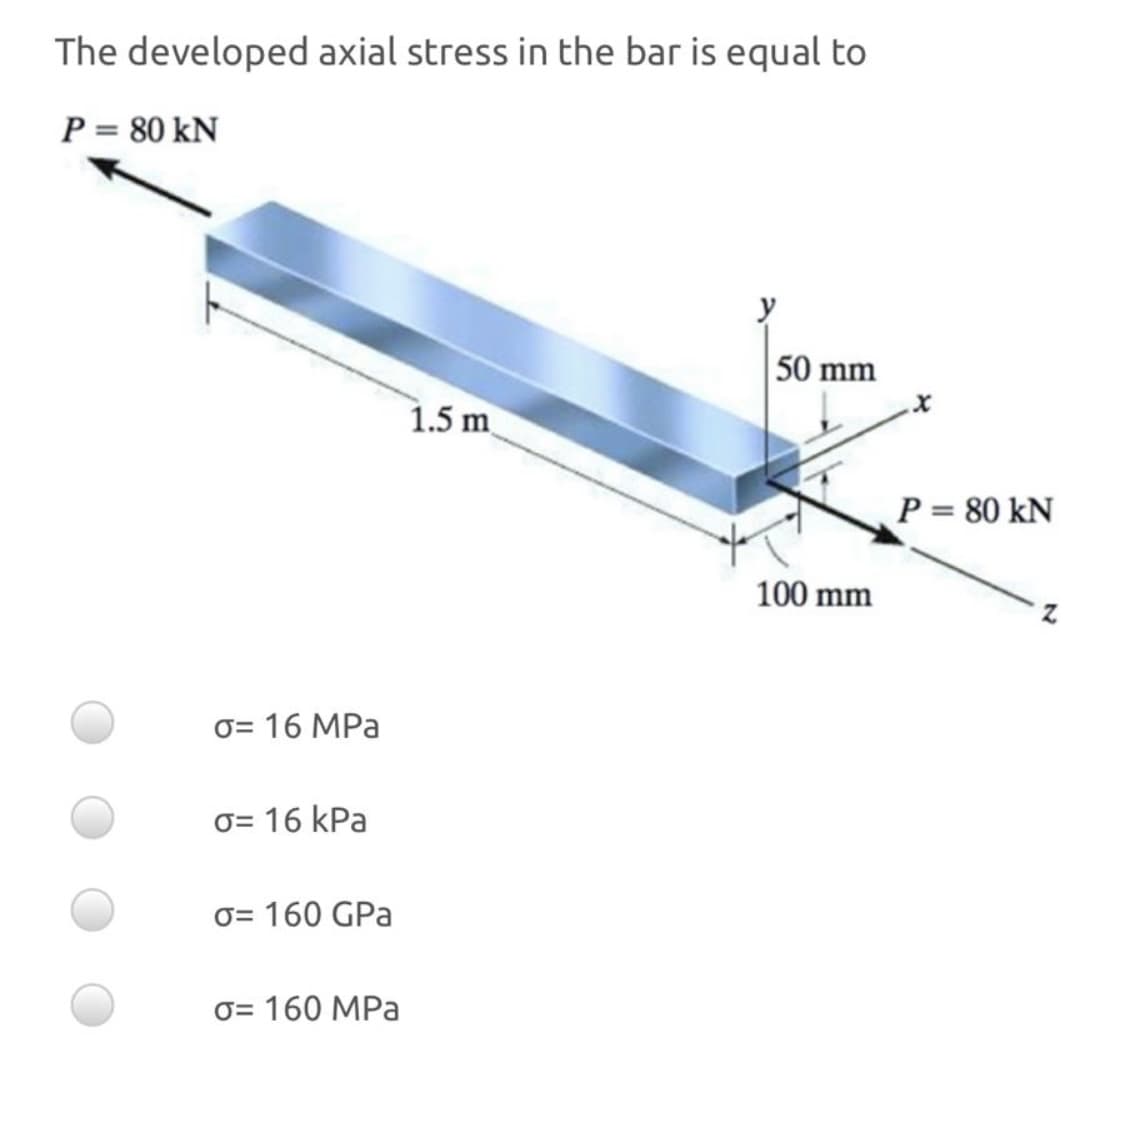 The developed axial stress in the bar is equal to
P = 80 kN
50 mm
1.5 m
P = 80 kN
100 mm
0= 16 MPa
0= 16 kPa
O= 160 GPa
O= 160 MPa
